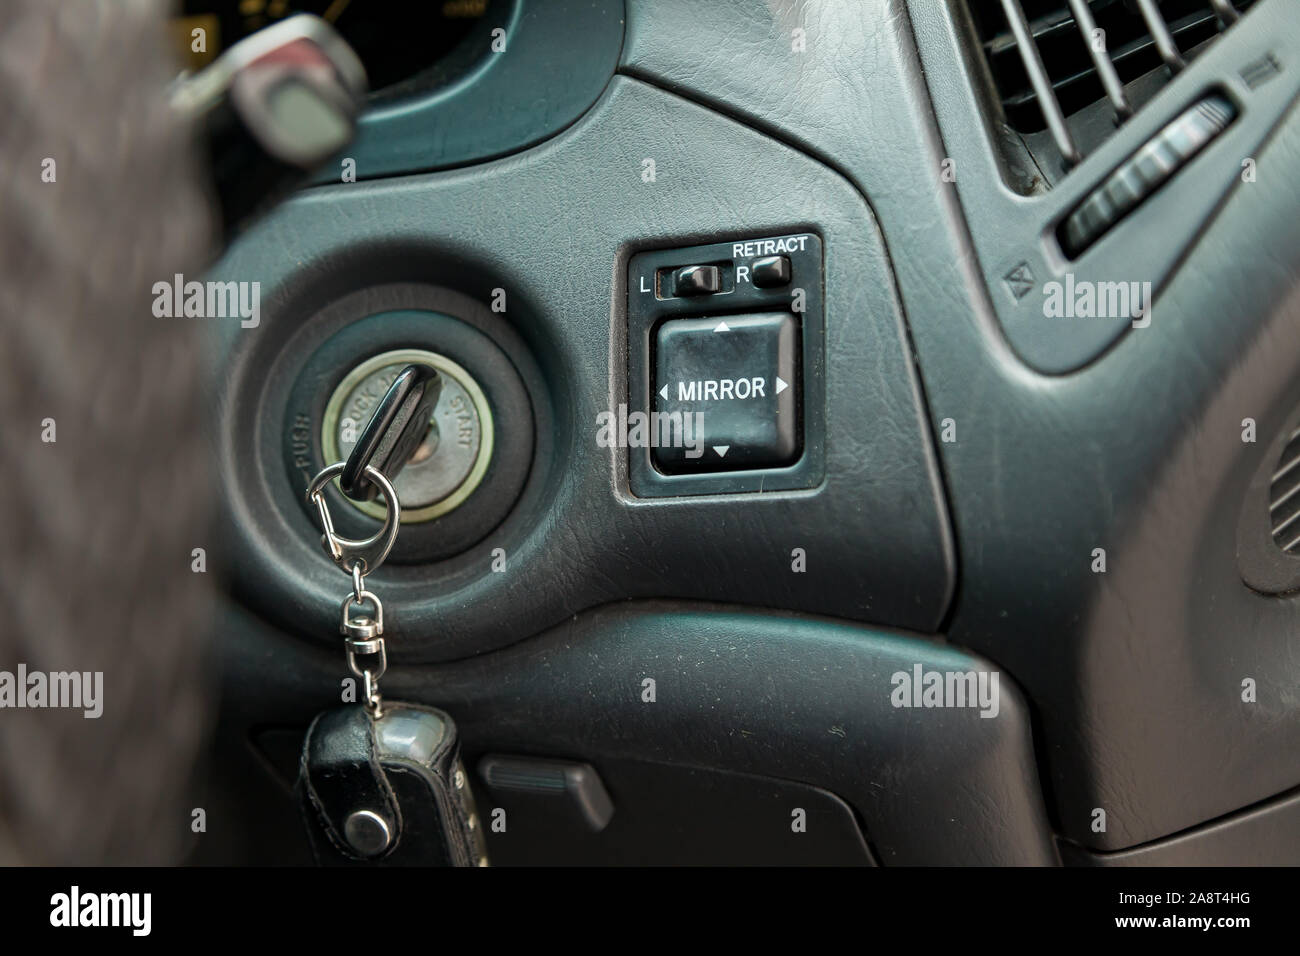 Novosibirsk, Russia - 11.05.2019: View to the gray interior of Toyota Harrier or Lexus RX300 with dashboard, key hole, mirror adjust buttons after cle Stock Photo